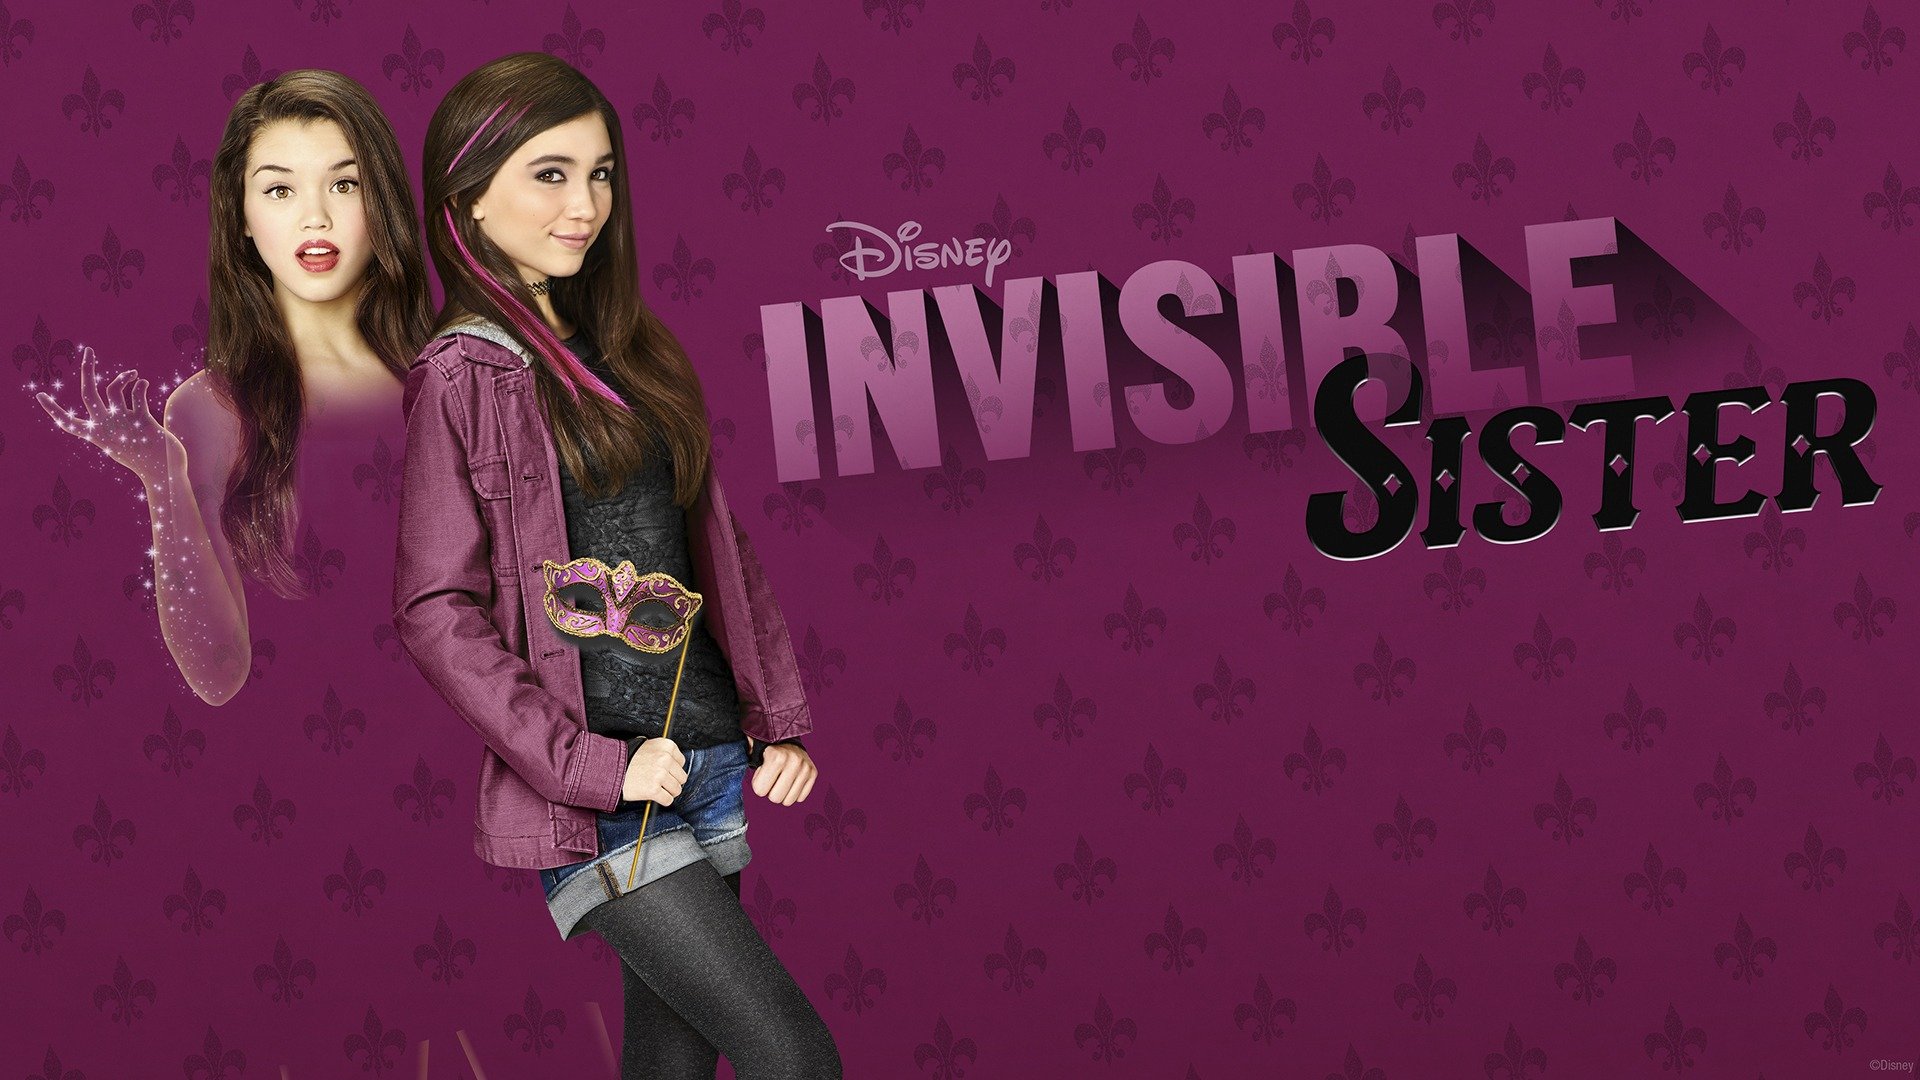 invisible sister movie online